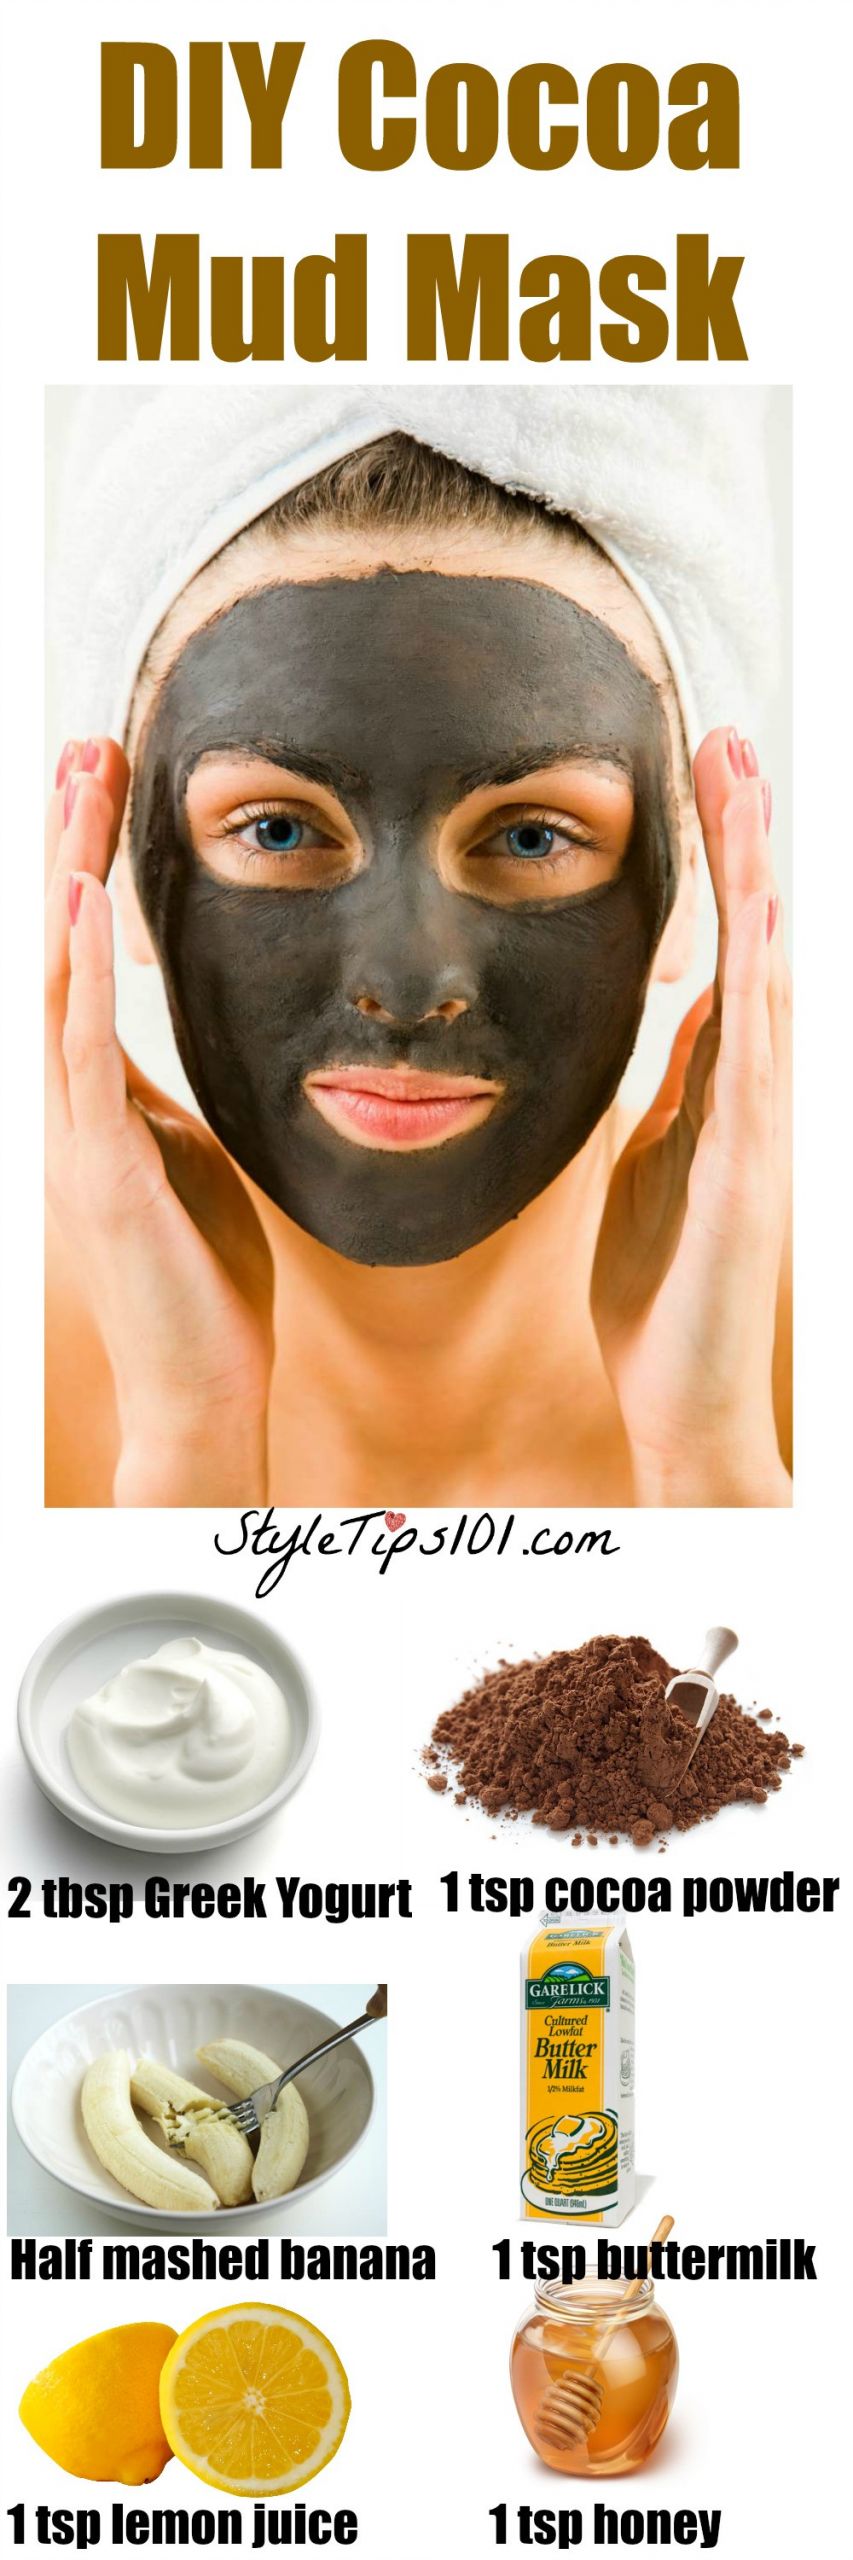 DIY Facial Masks
 DIY Mud Mask For Acne Prone and Oily Skin